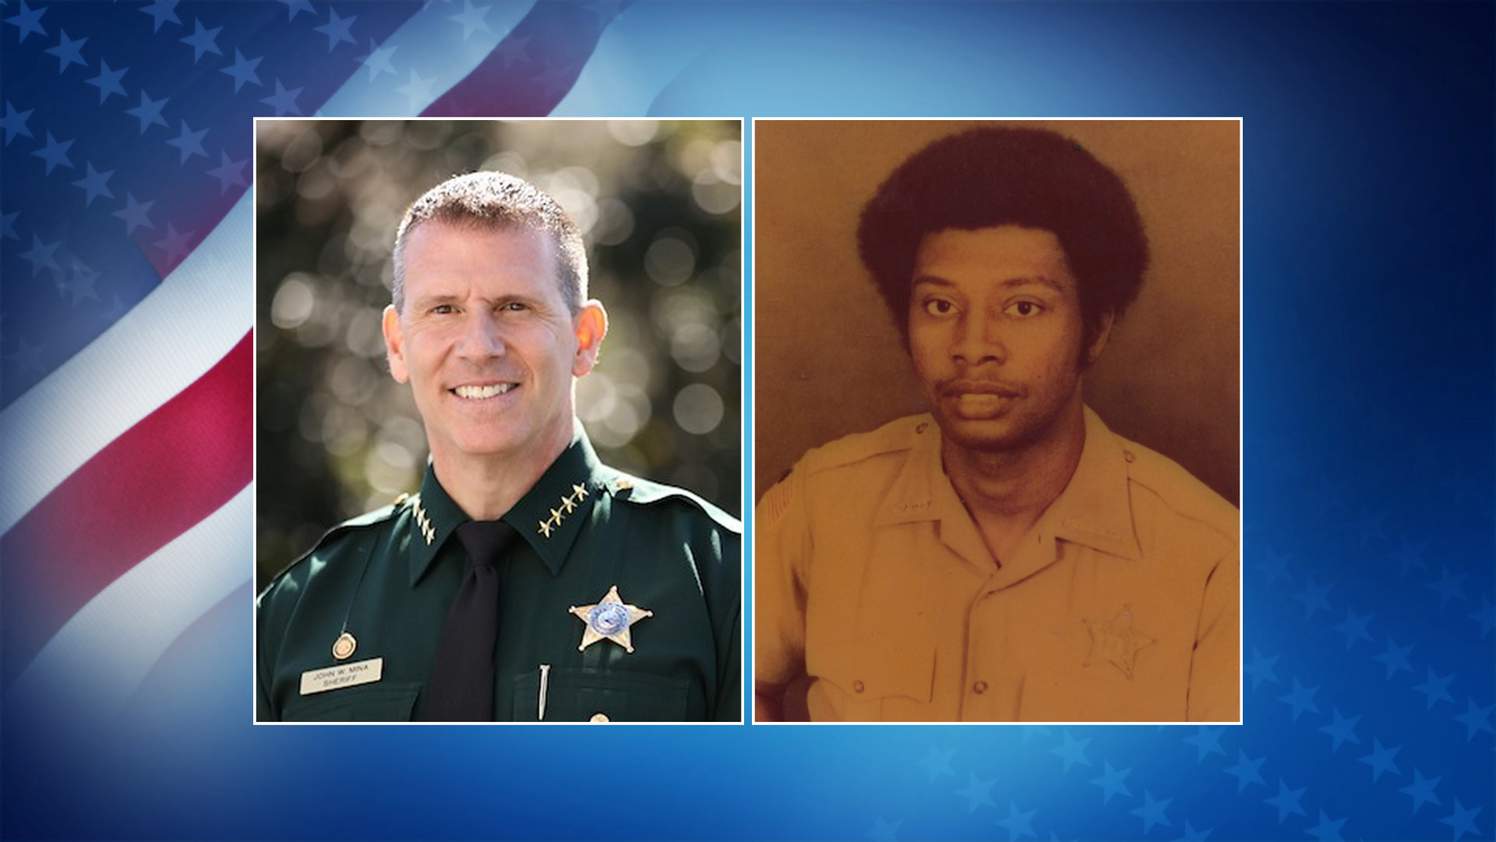 Meet the candidates: Here’s who’s running for Orange County sheriff